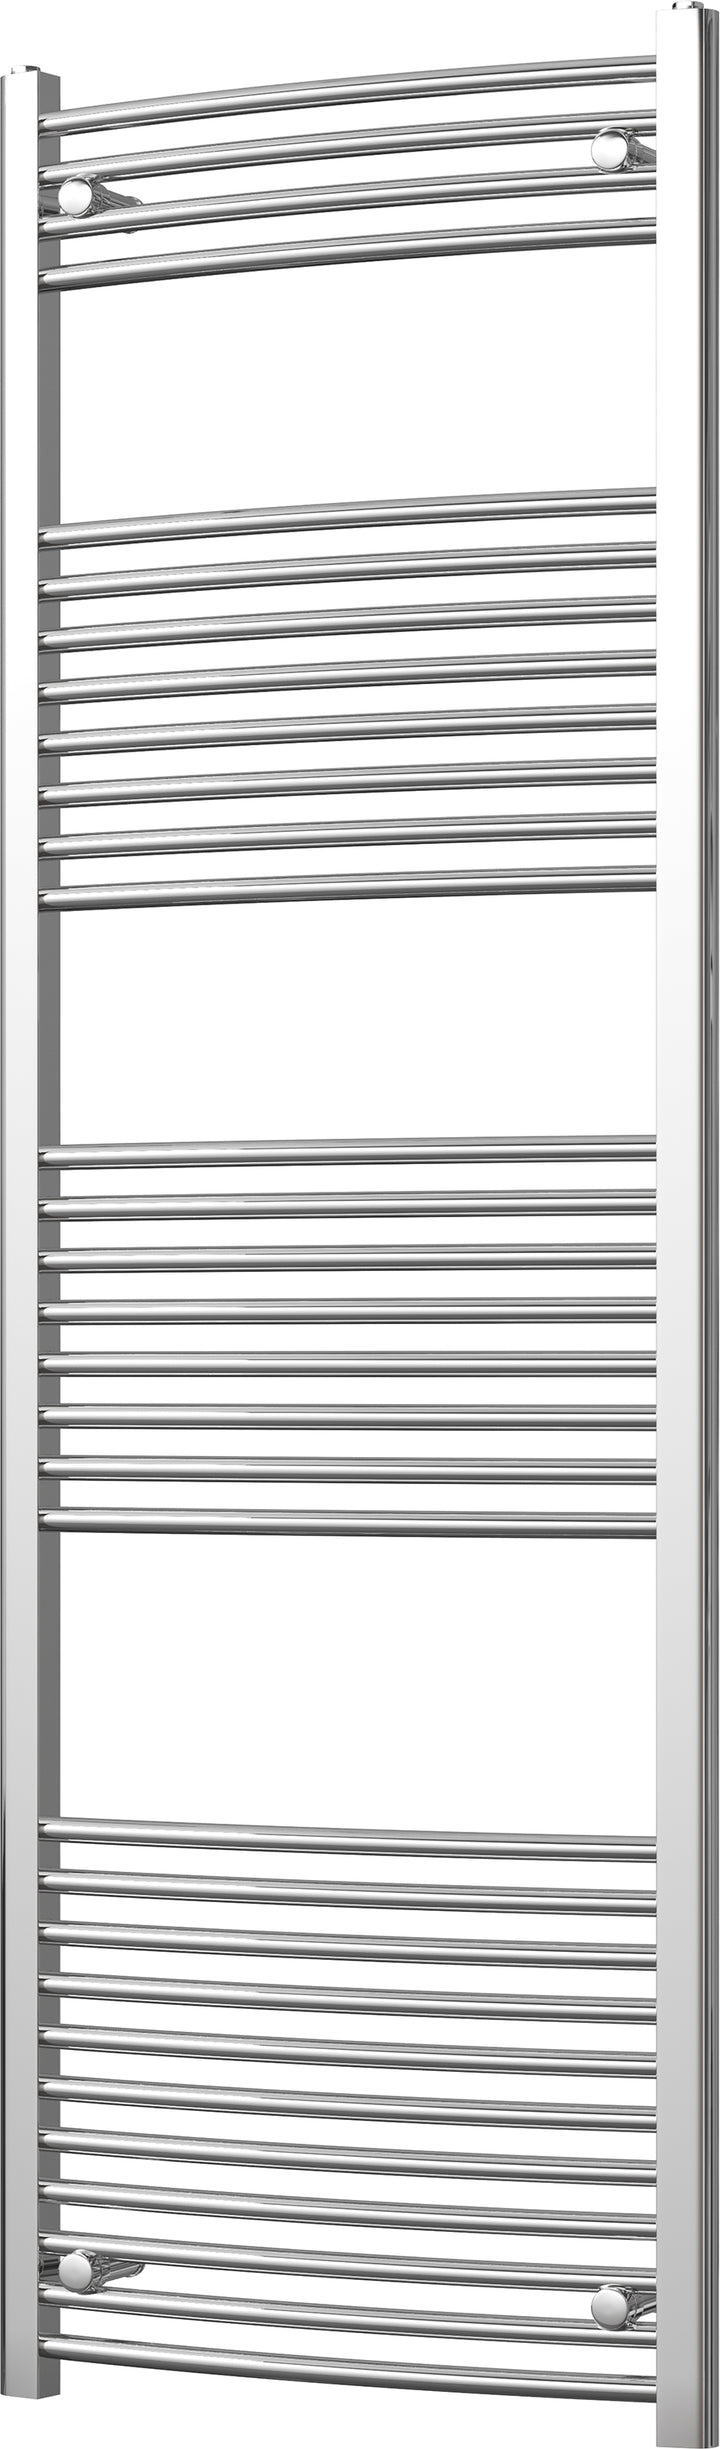 Zennor - Chrome Heated Towel Rail - H1800mm x W600mm - Curved